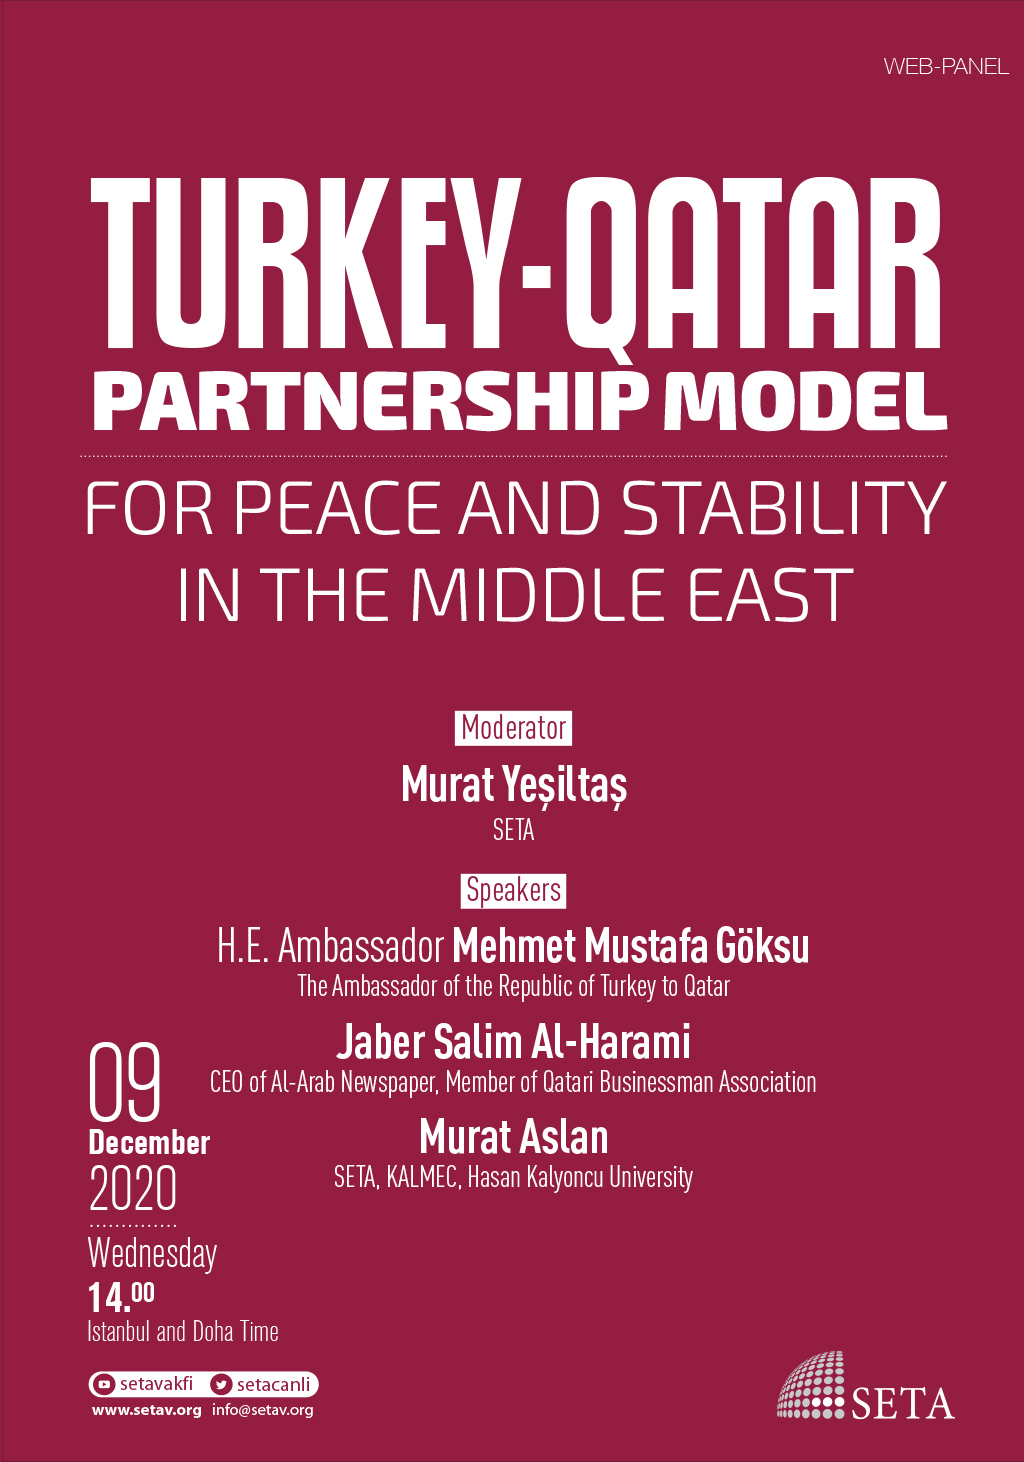 Turkey-Qatar Partnership Model For Peace and Stability in the Middle